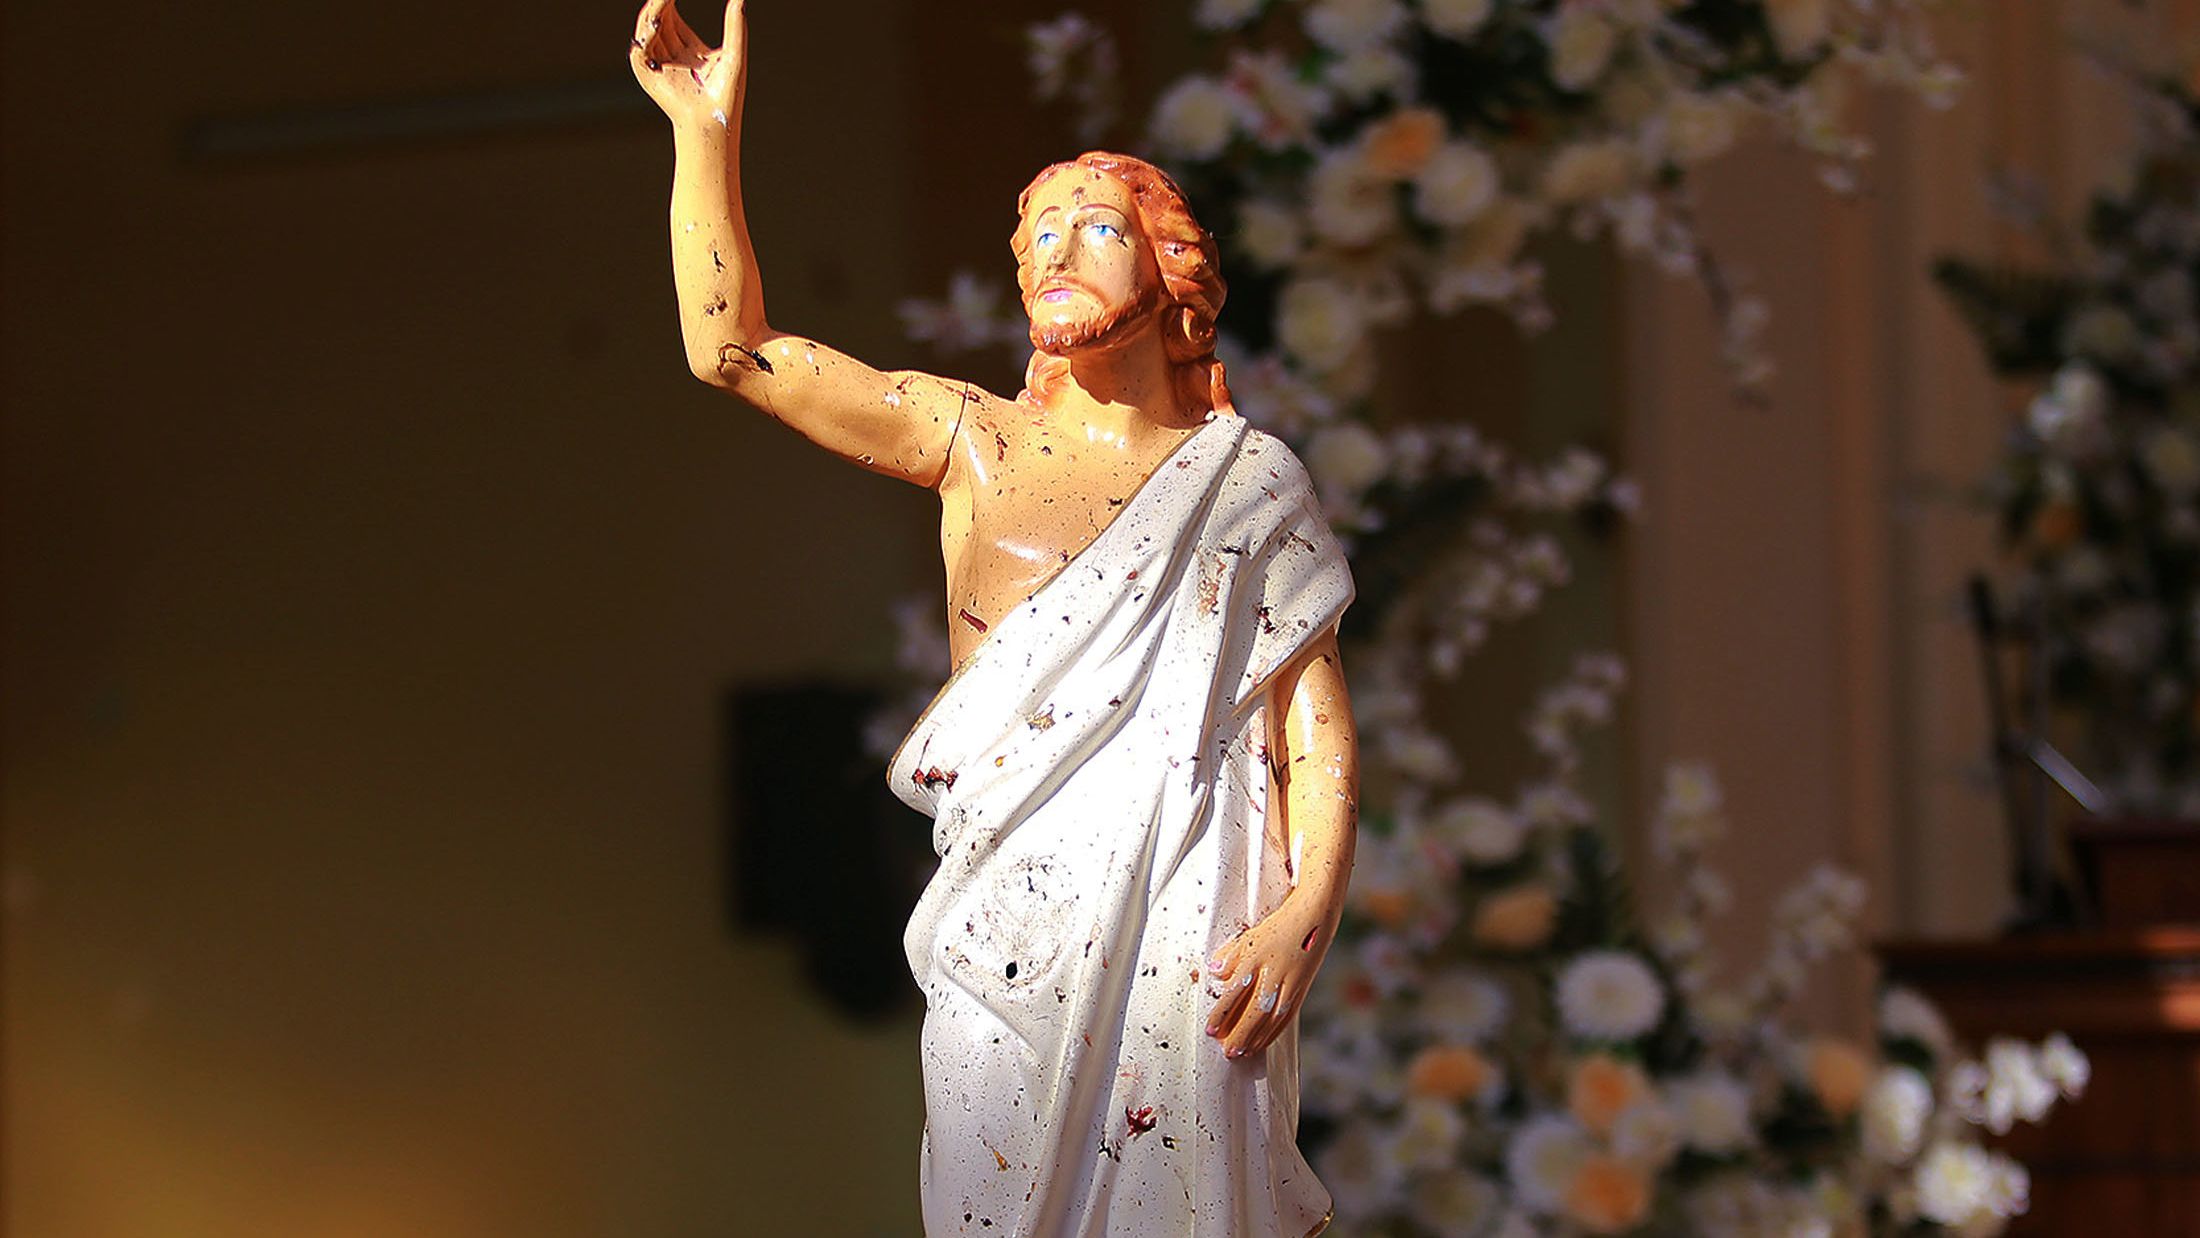 Blood stains are seen on a statue of Jesus Christ after a bomb blast inside a church in Negombo, on Sunday.